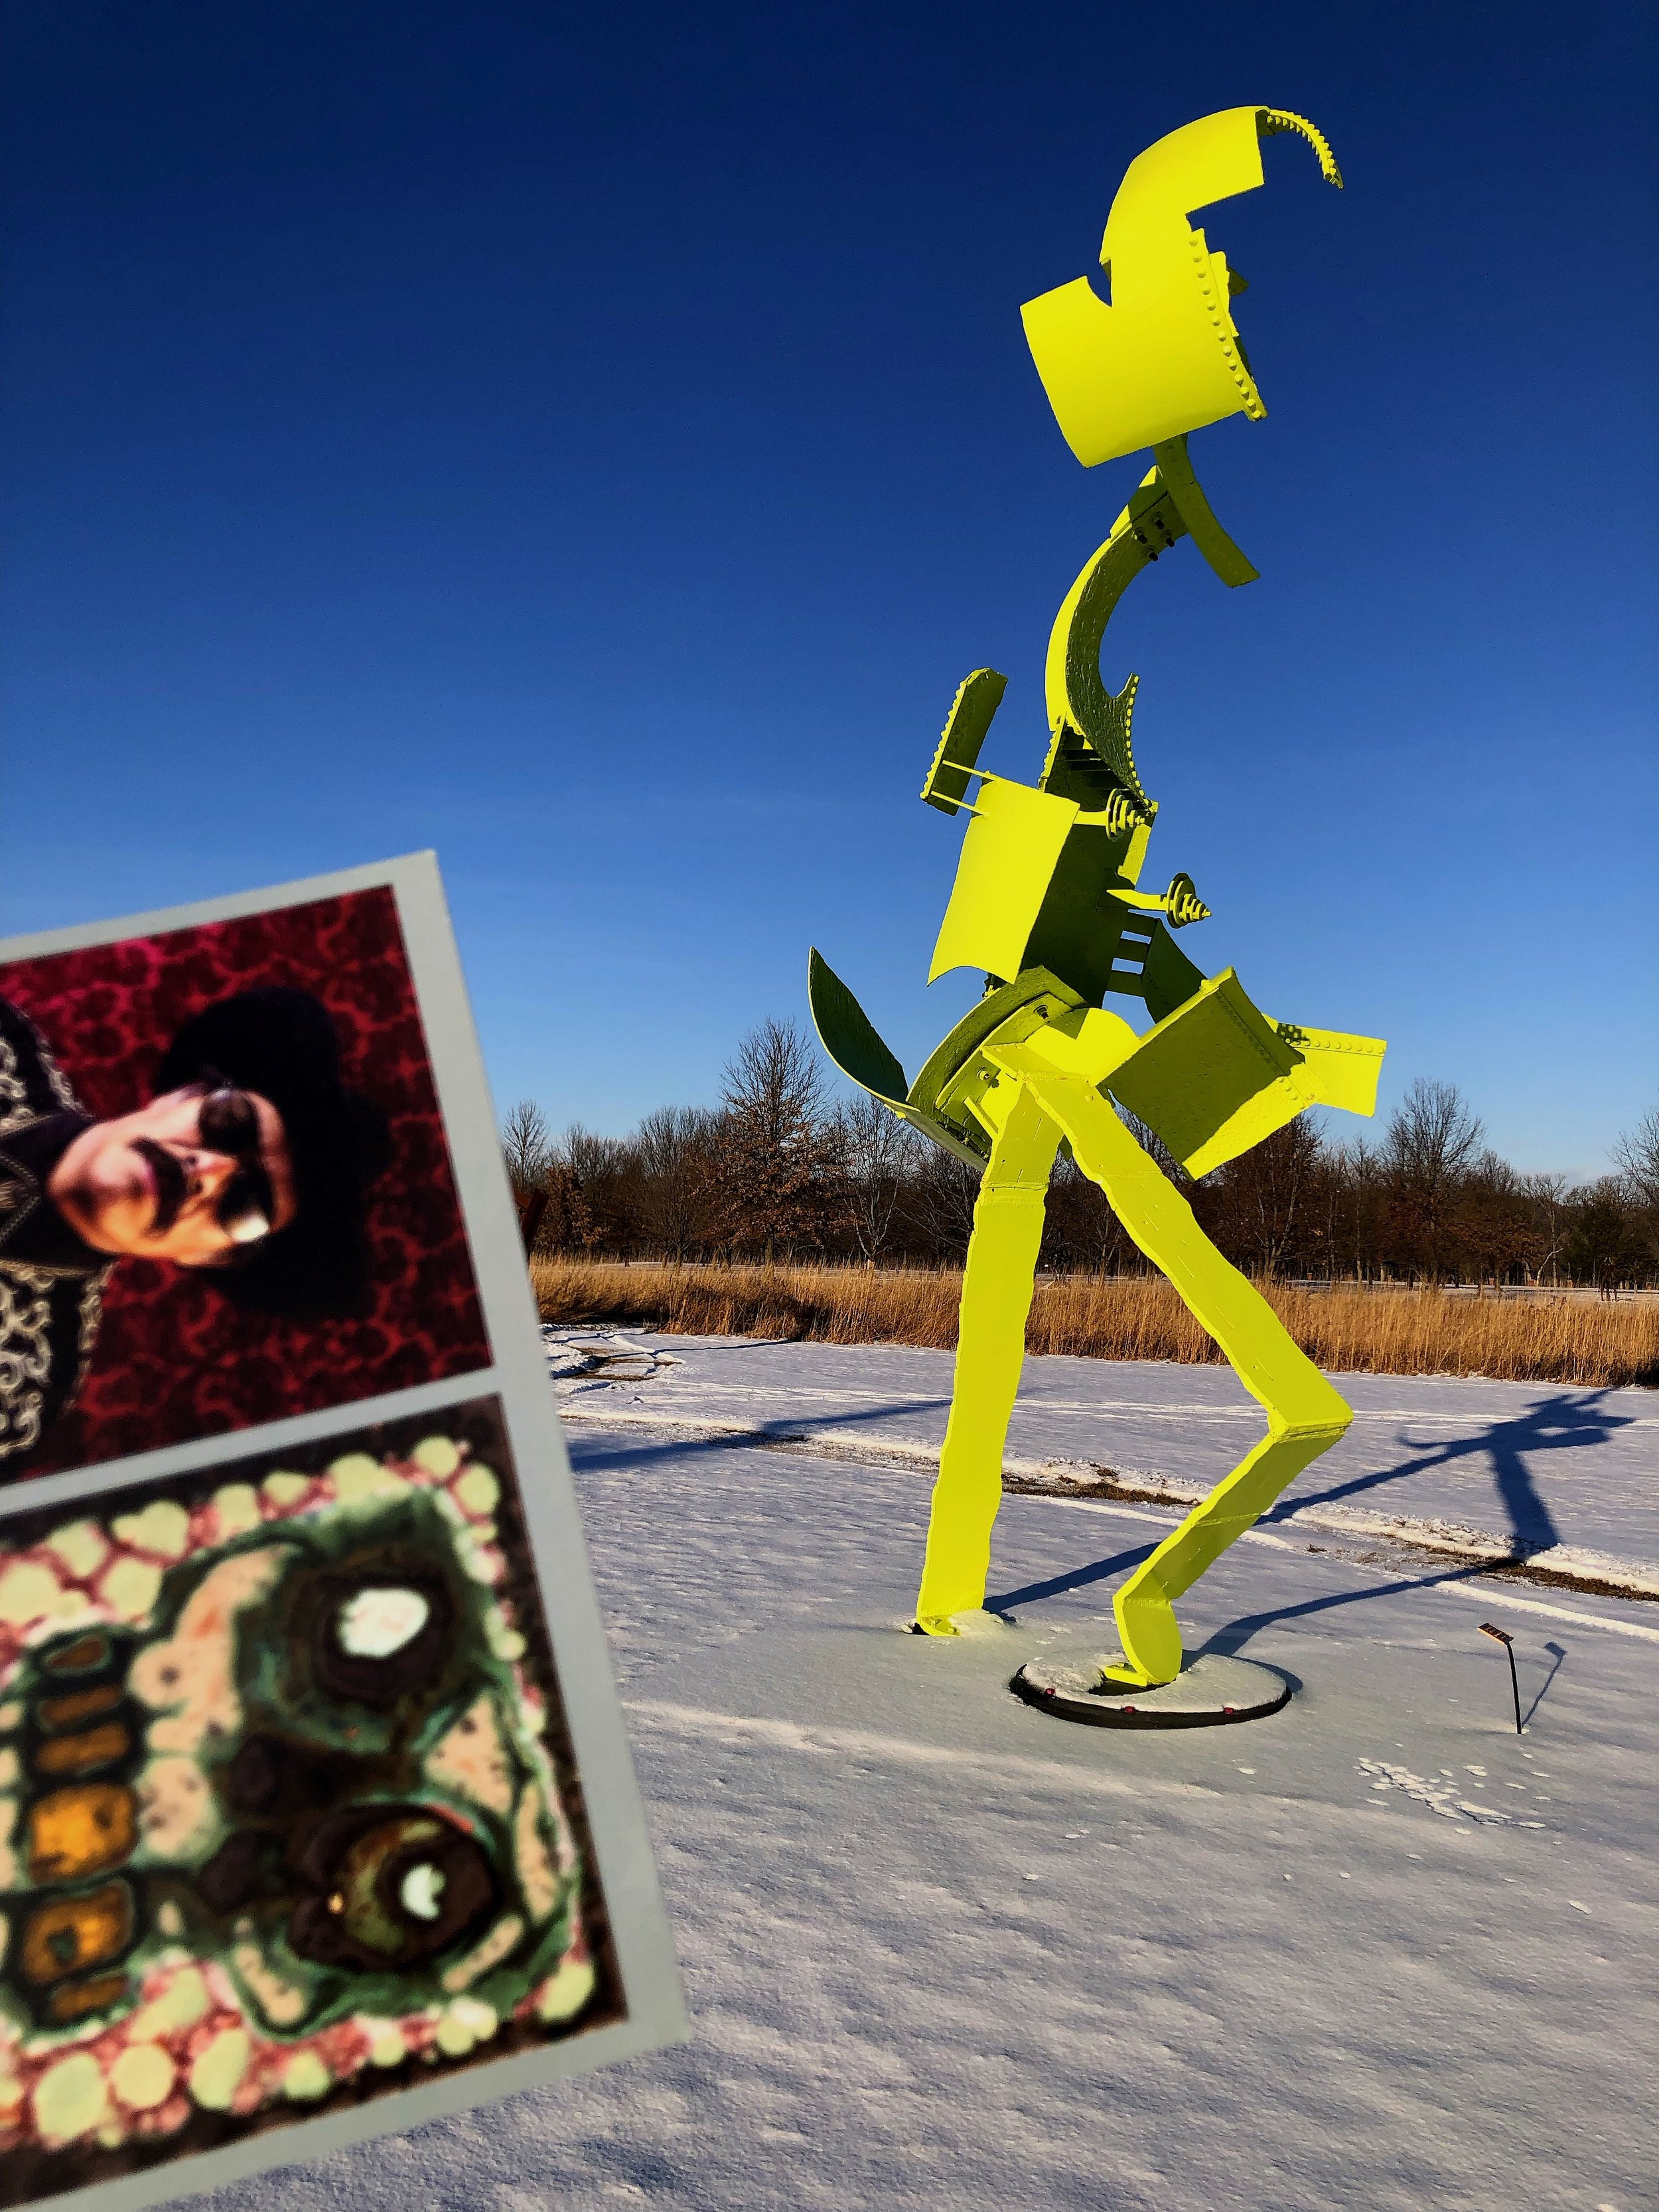 Anderson Center Sculpture Park, Red Wing, MN - dougie padilla